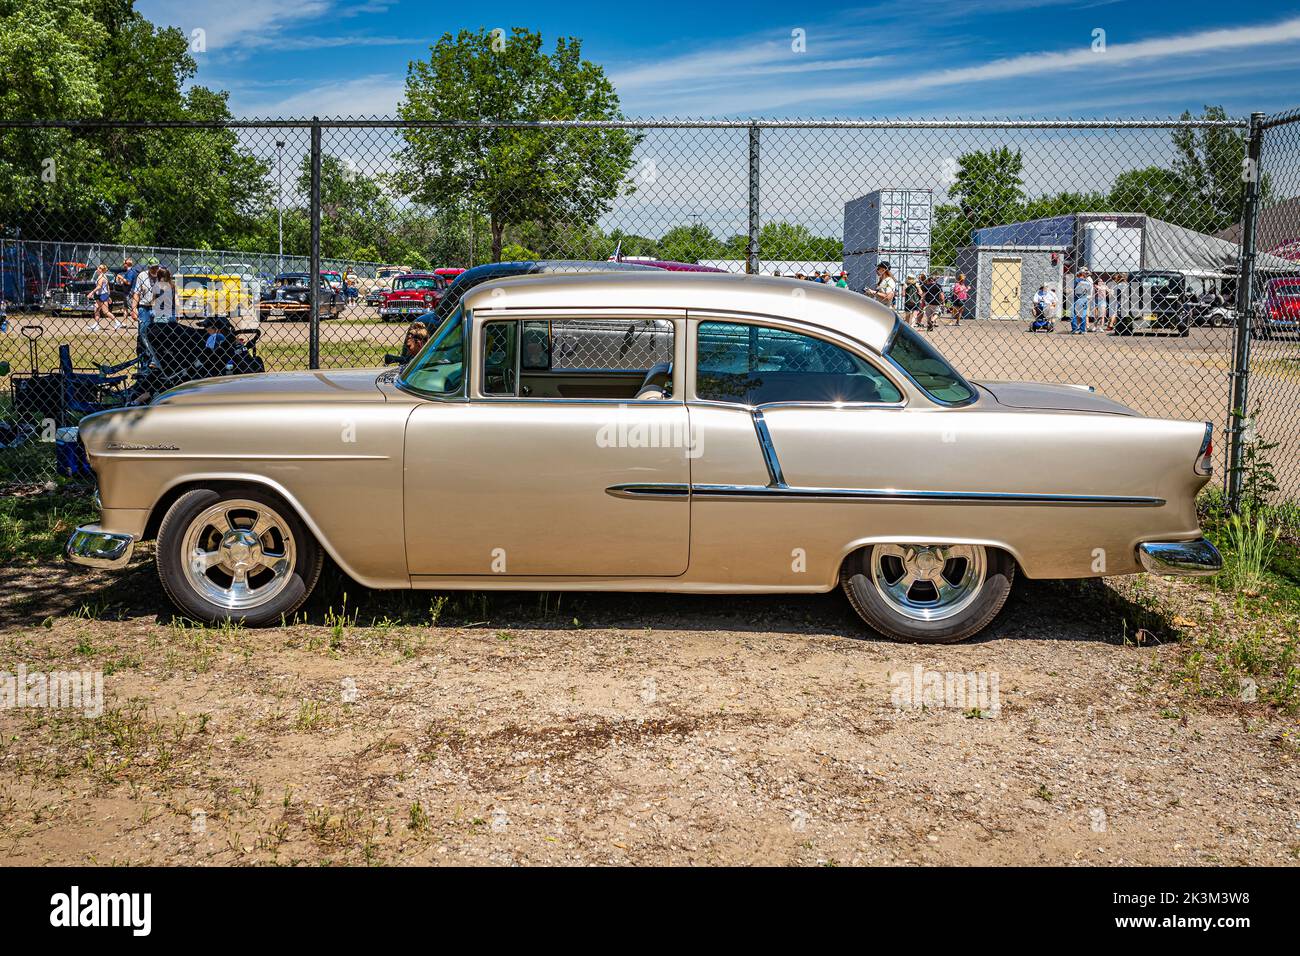 Falcon Heights, MN - June 18, 2022: High perspective side view of a 1955 Chevrolet 210 2 Door Sedan at a local car show. Stock Photo